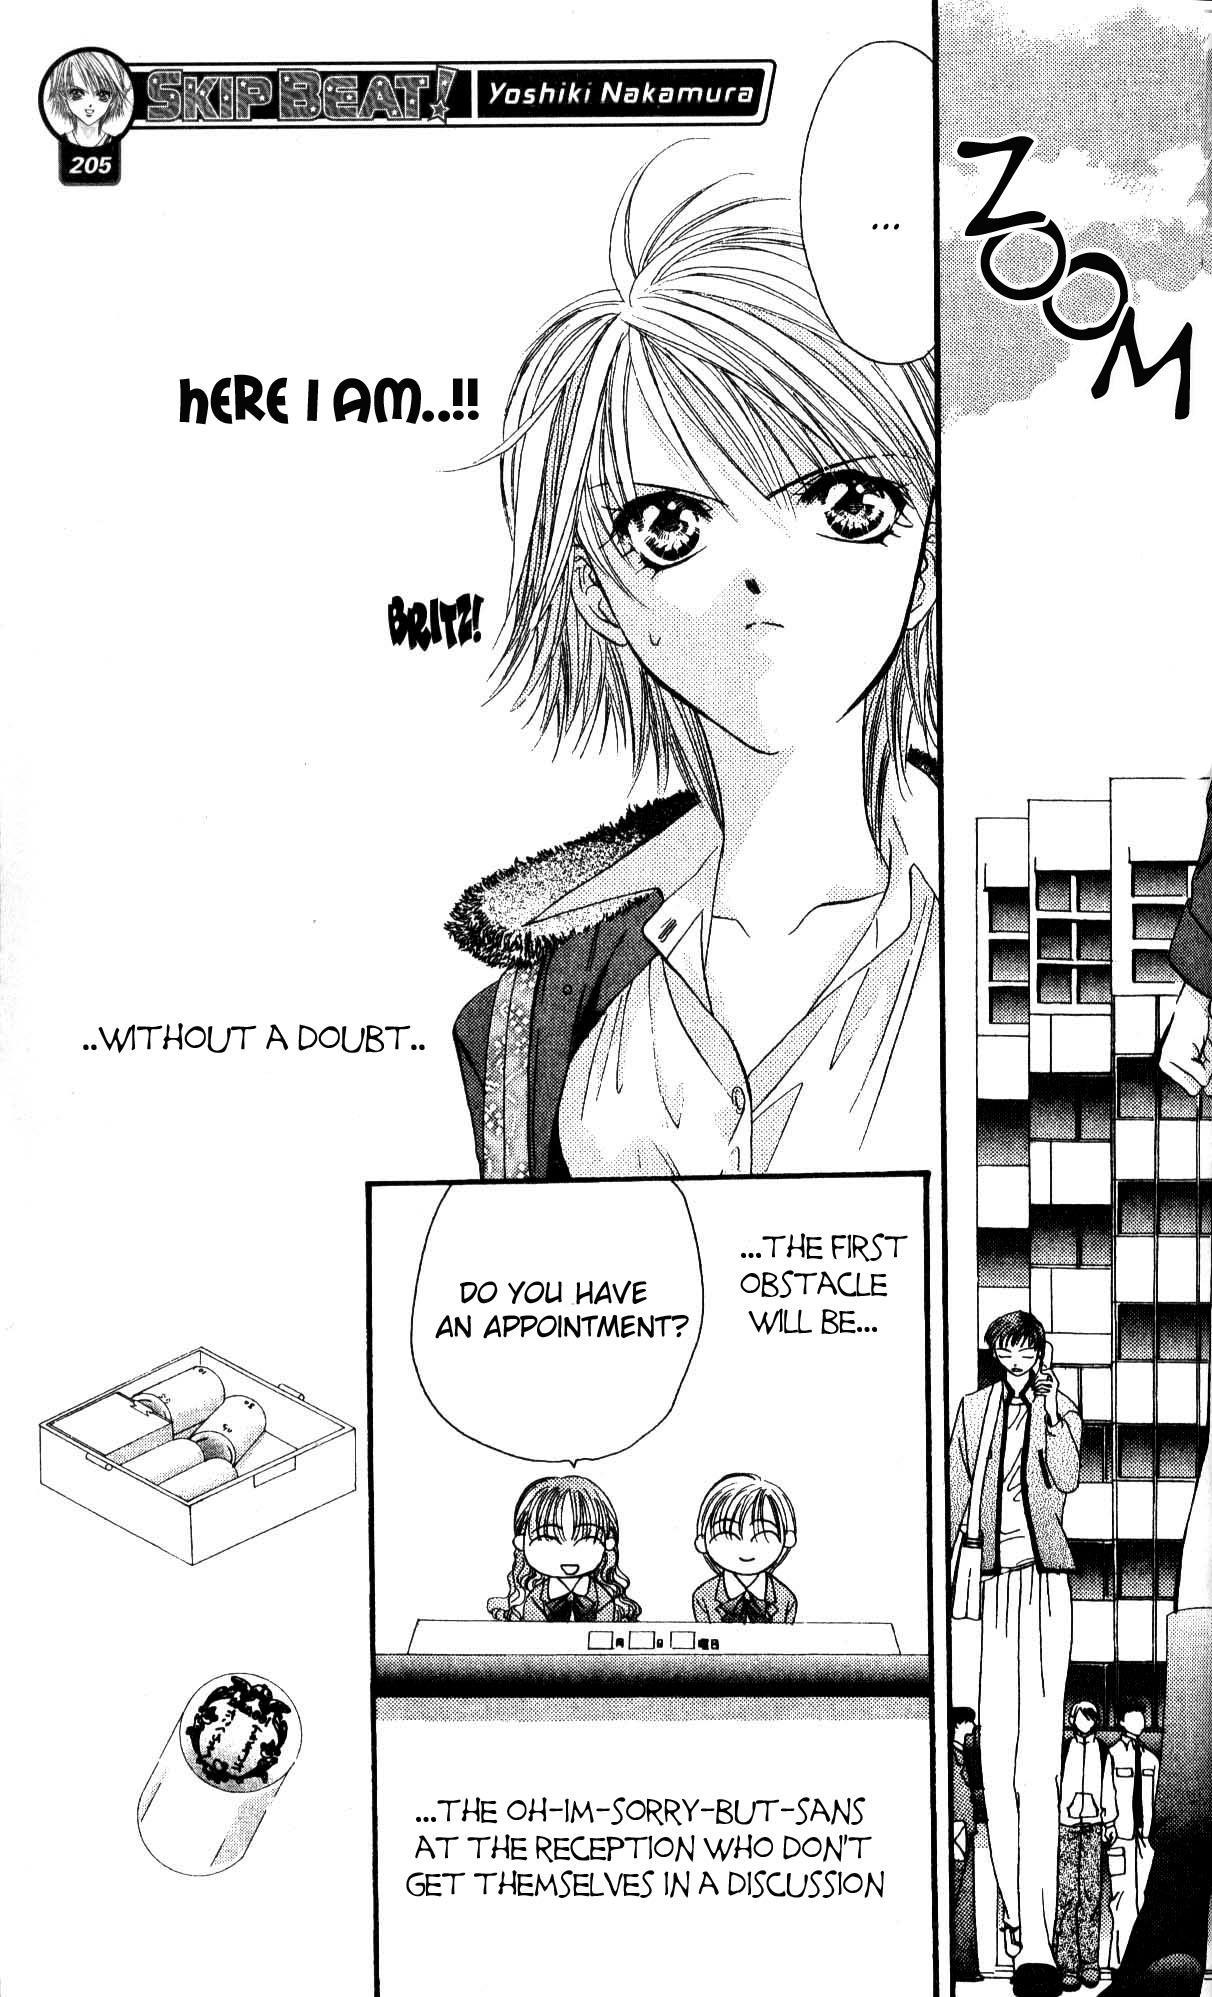 Skip Beat!, Chapter 7 That Name is Taboo image 11